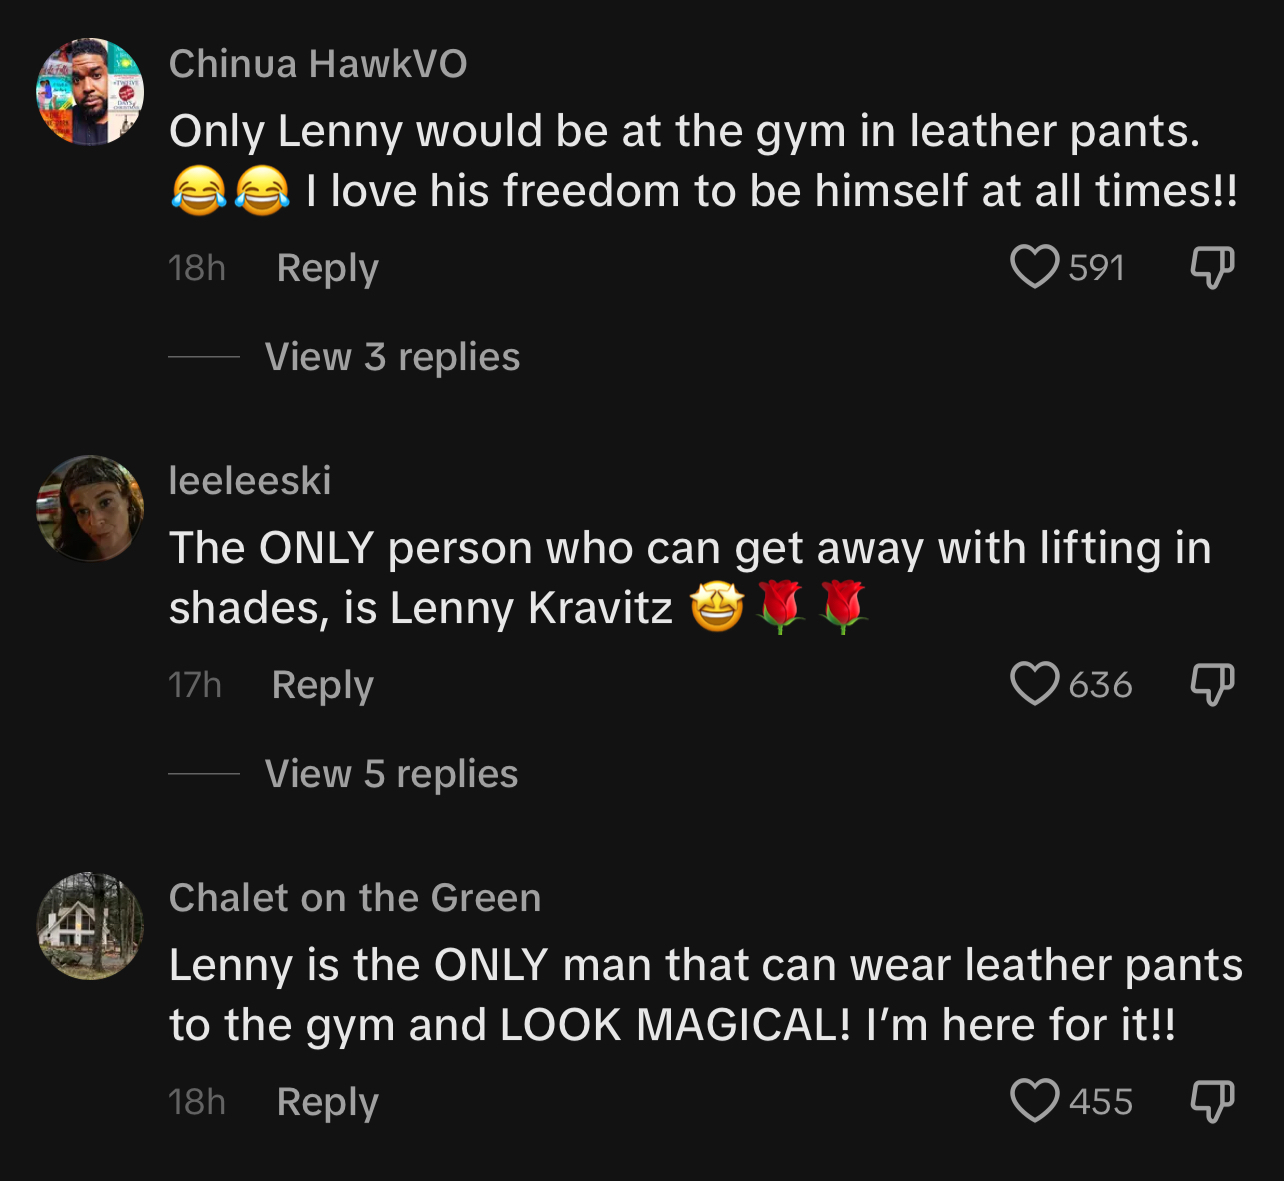 Screenshot of social media comments praising a person&#x27;s unique style at the gym, highlighting their individuality and magical look